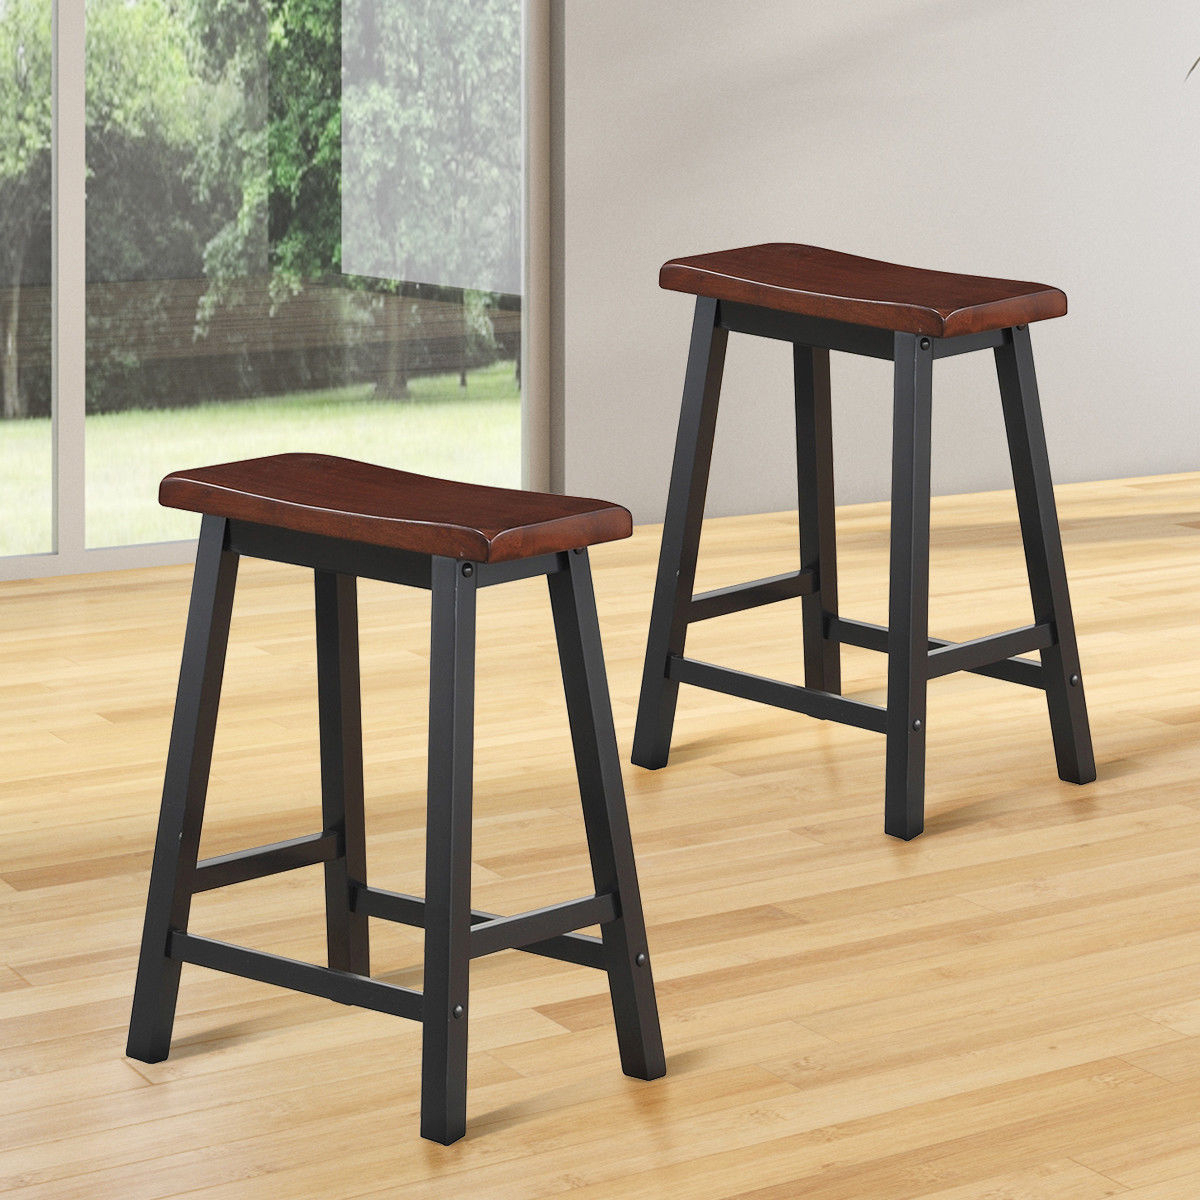 Set Of 2 Bar Stools 24''H Saddle Seat Pub Chair Home Kitchen Dining Room Brown